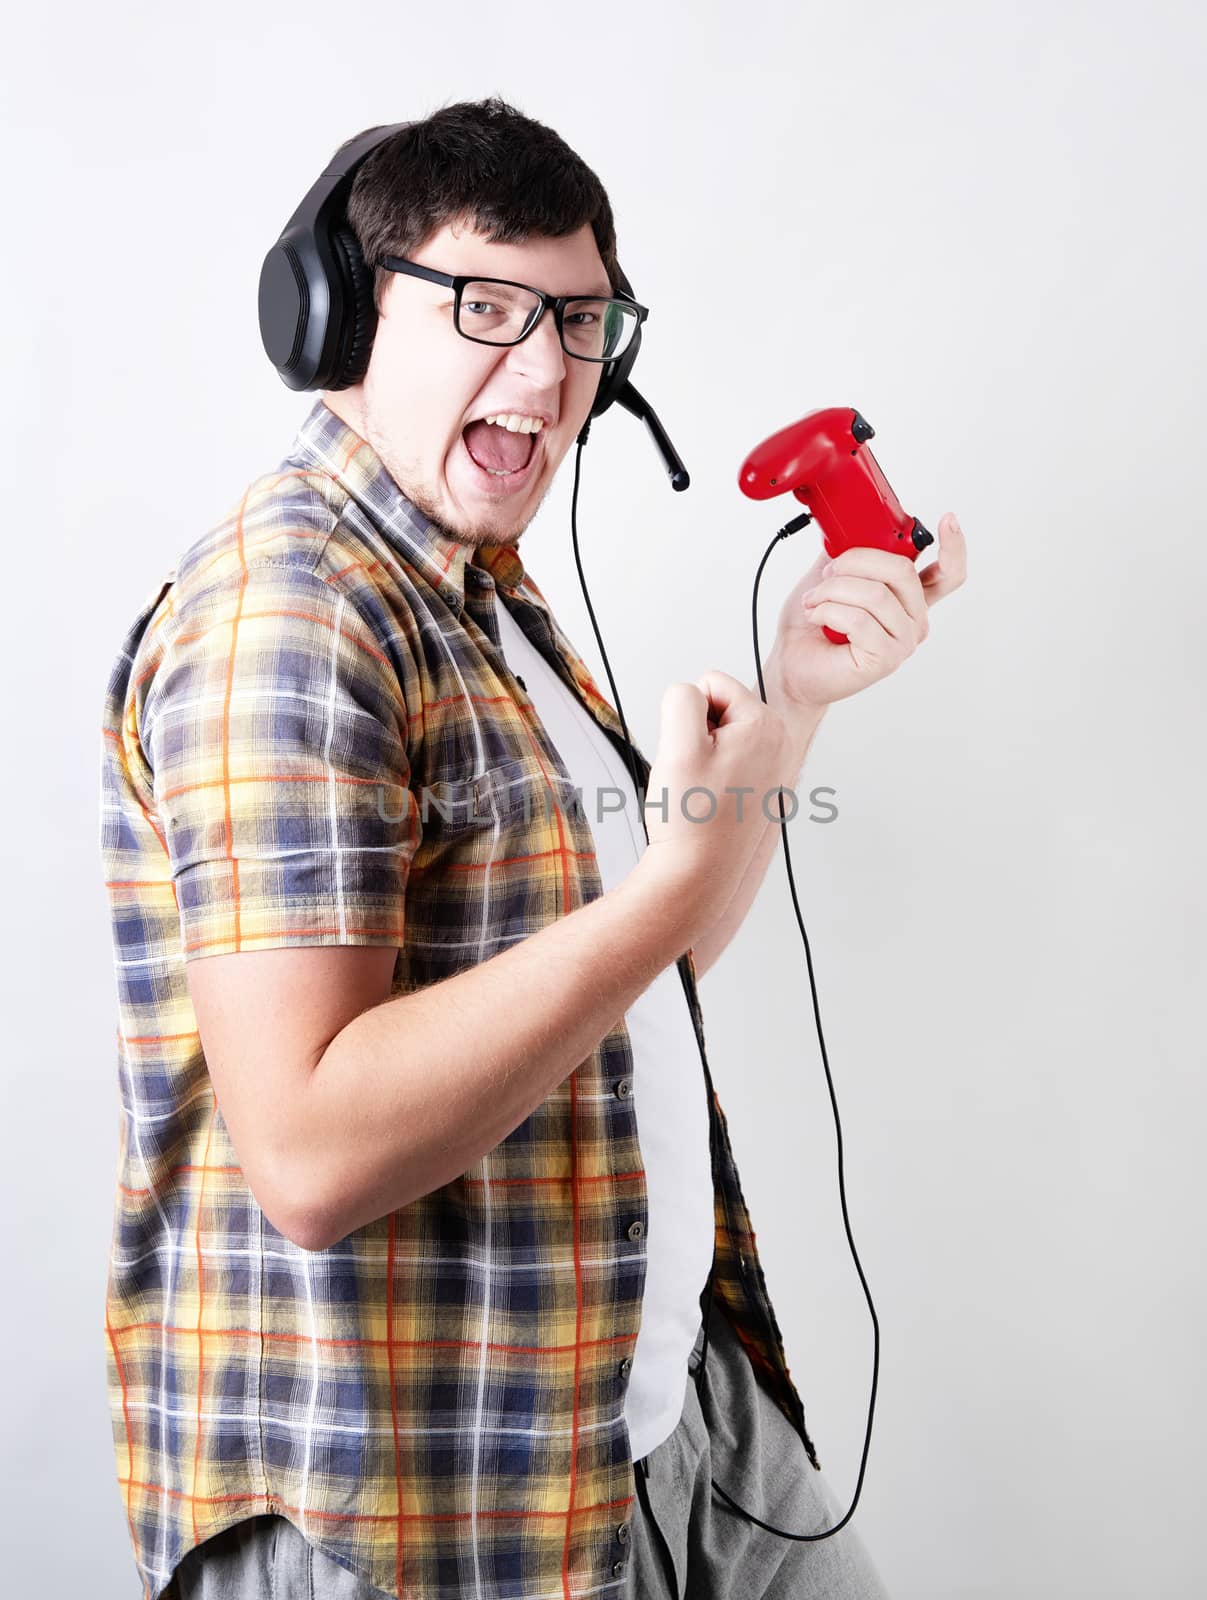 Excited young man playing video games holding a joystick isolated on gray background by Desperada